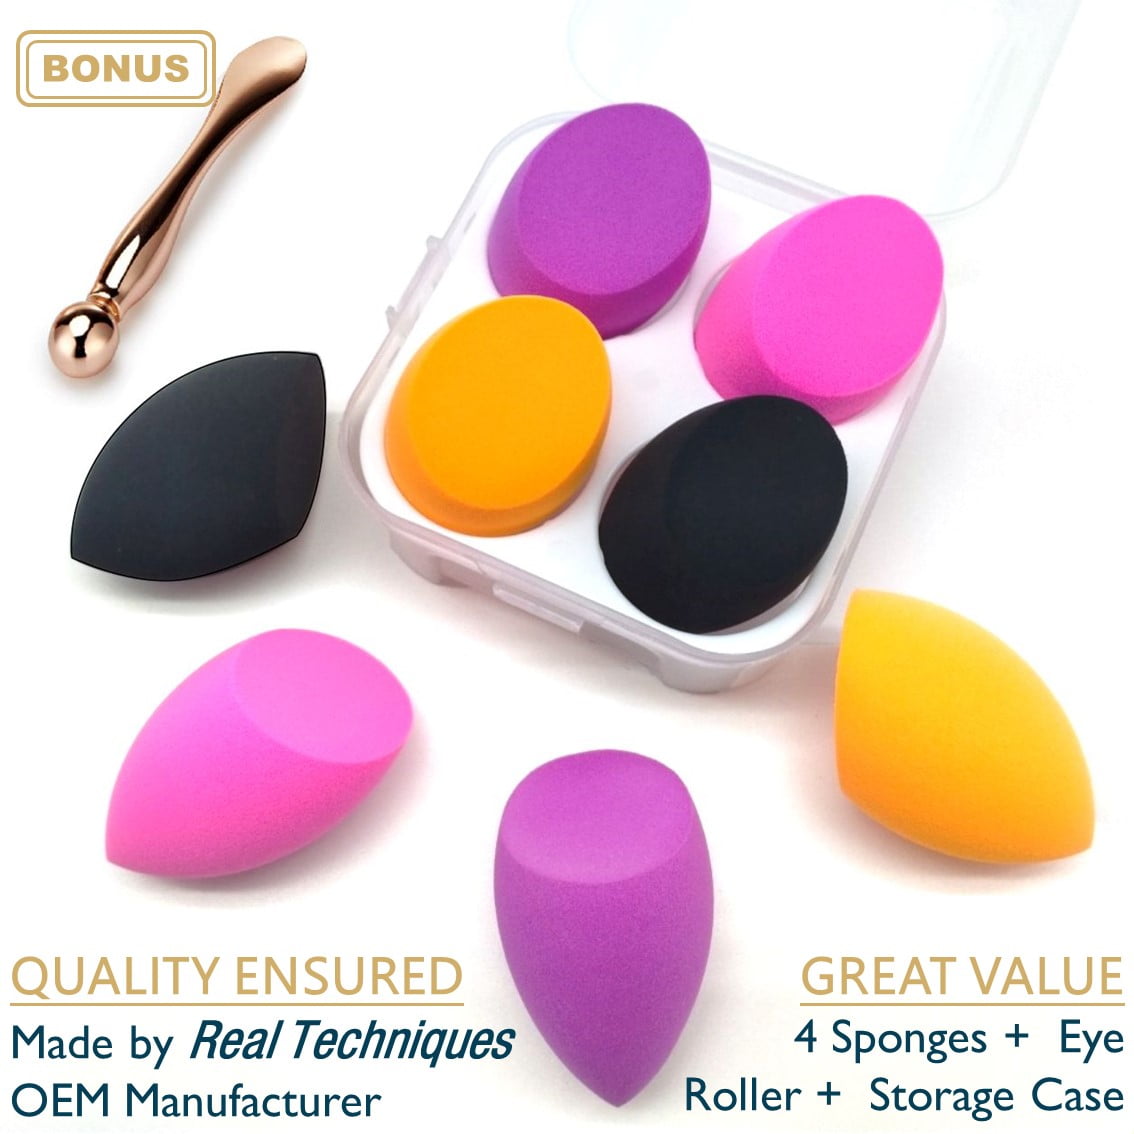 ComfiTime Blender Set - 4 pcs Makeup Sponge with Metal Face Roller and Storage Case, Great Makeup Puff for Foundation and Powder - Walmart.com